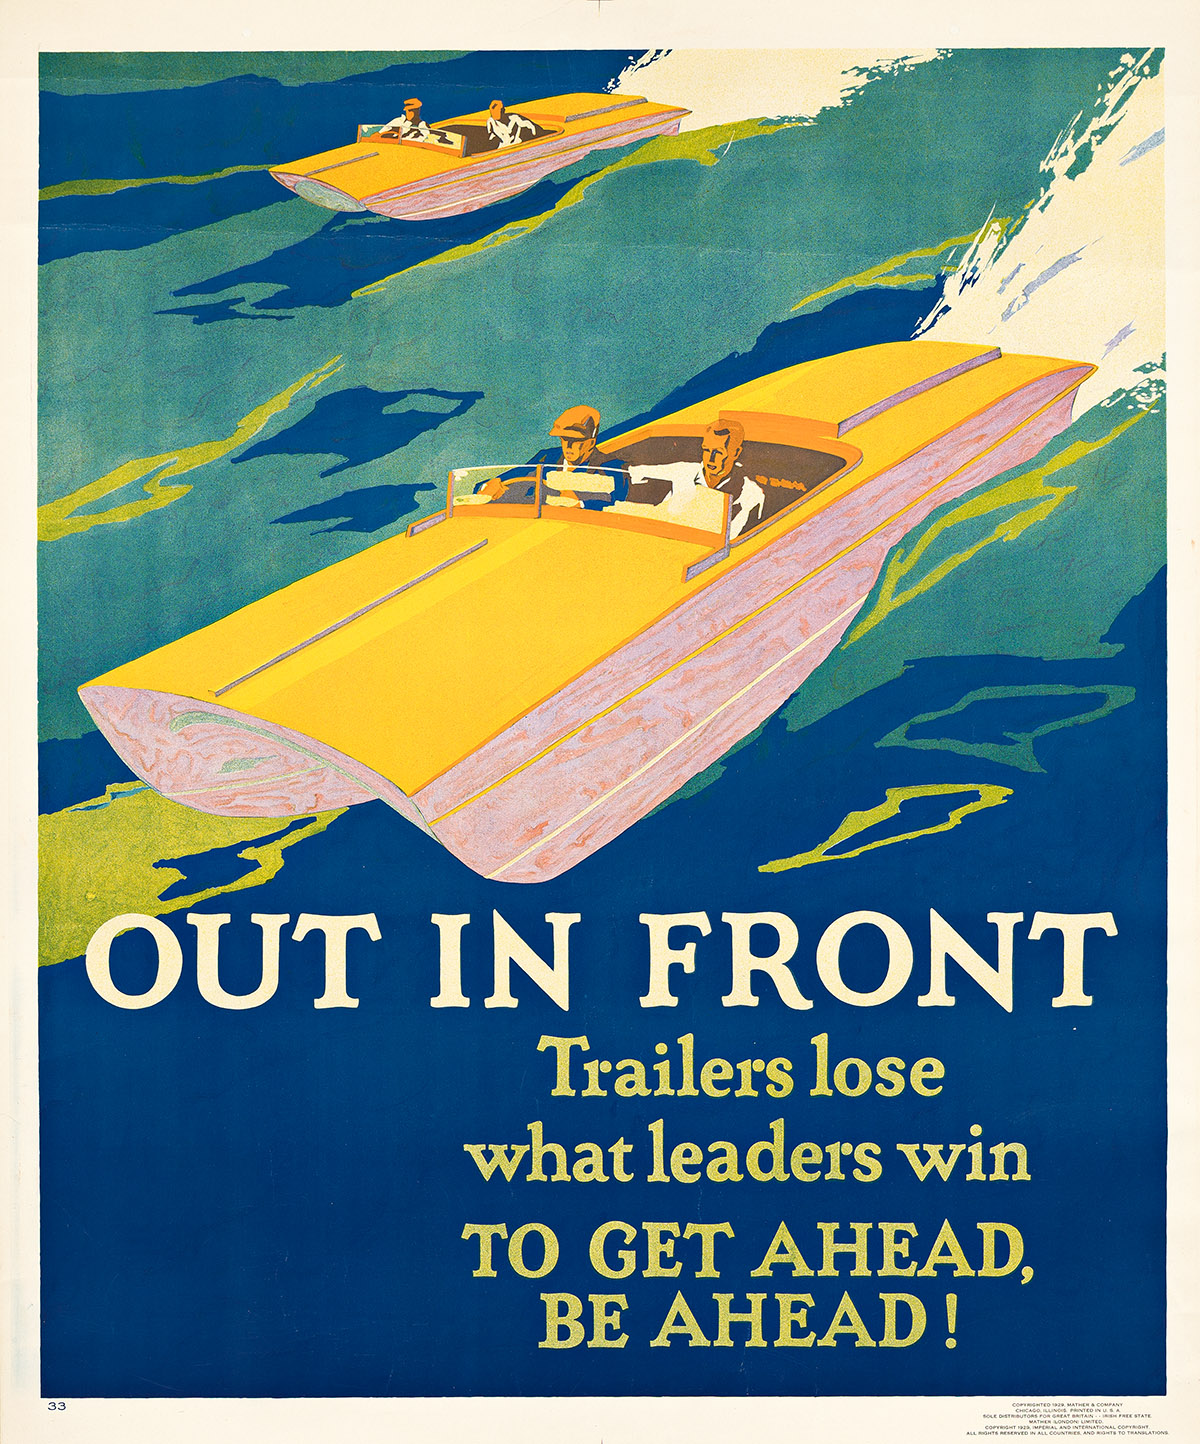 DESIGNER UNKNOWN. OUT IN FRONT / TO GET AHEAD, BE AHEAD! 1929. 44x35 inches, 111¾x89 cm. Mather & Company, Chicago.